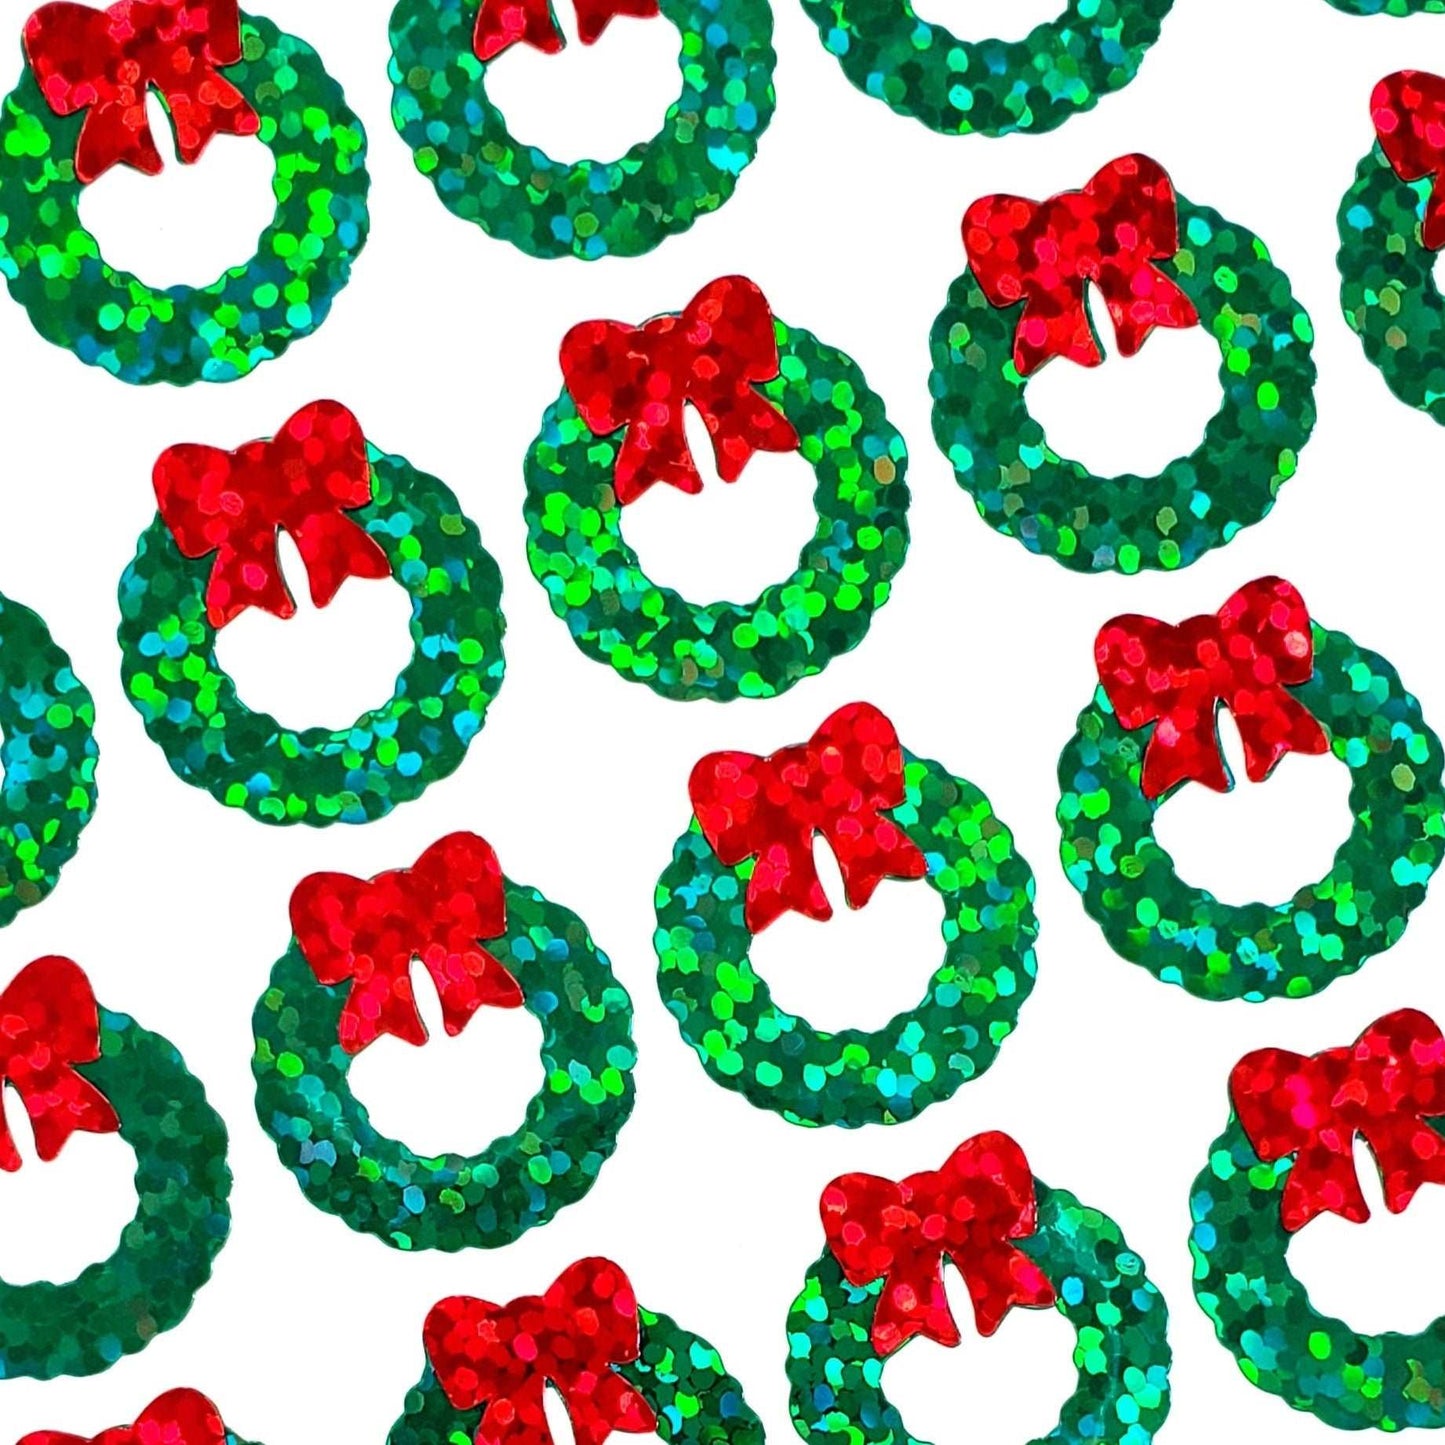 Christmas Wreath Stickers, set of 48 small glitter green wreath vinyl decals for holiday card envelopes, ornaments, gift tags and crafts.